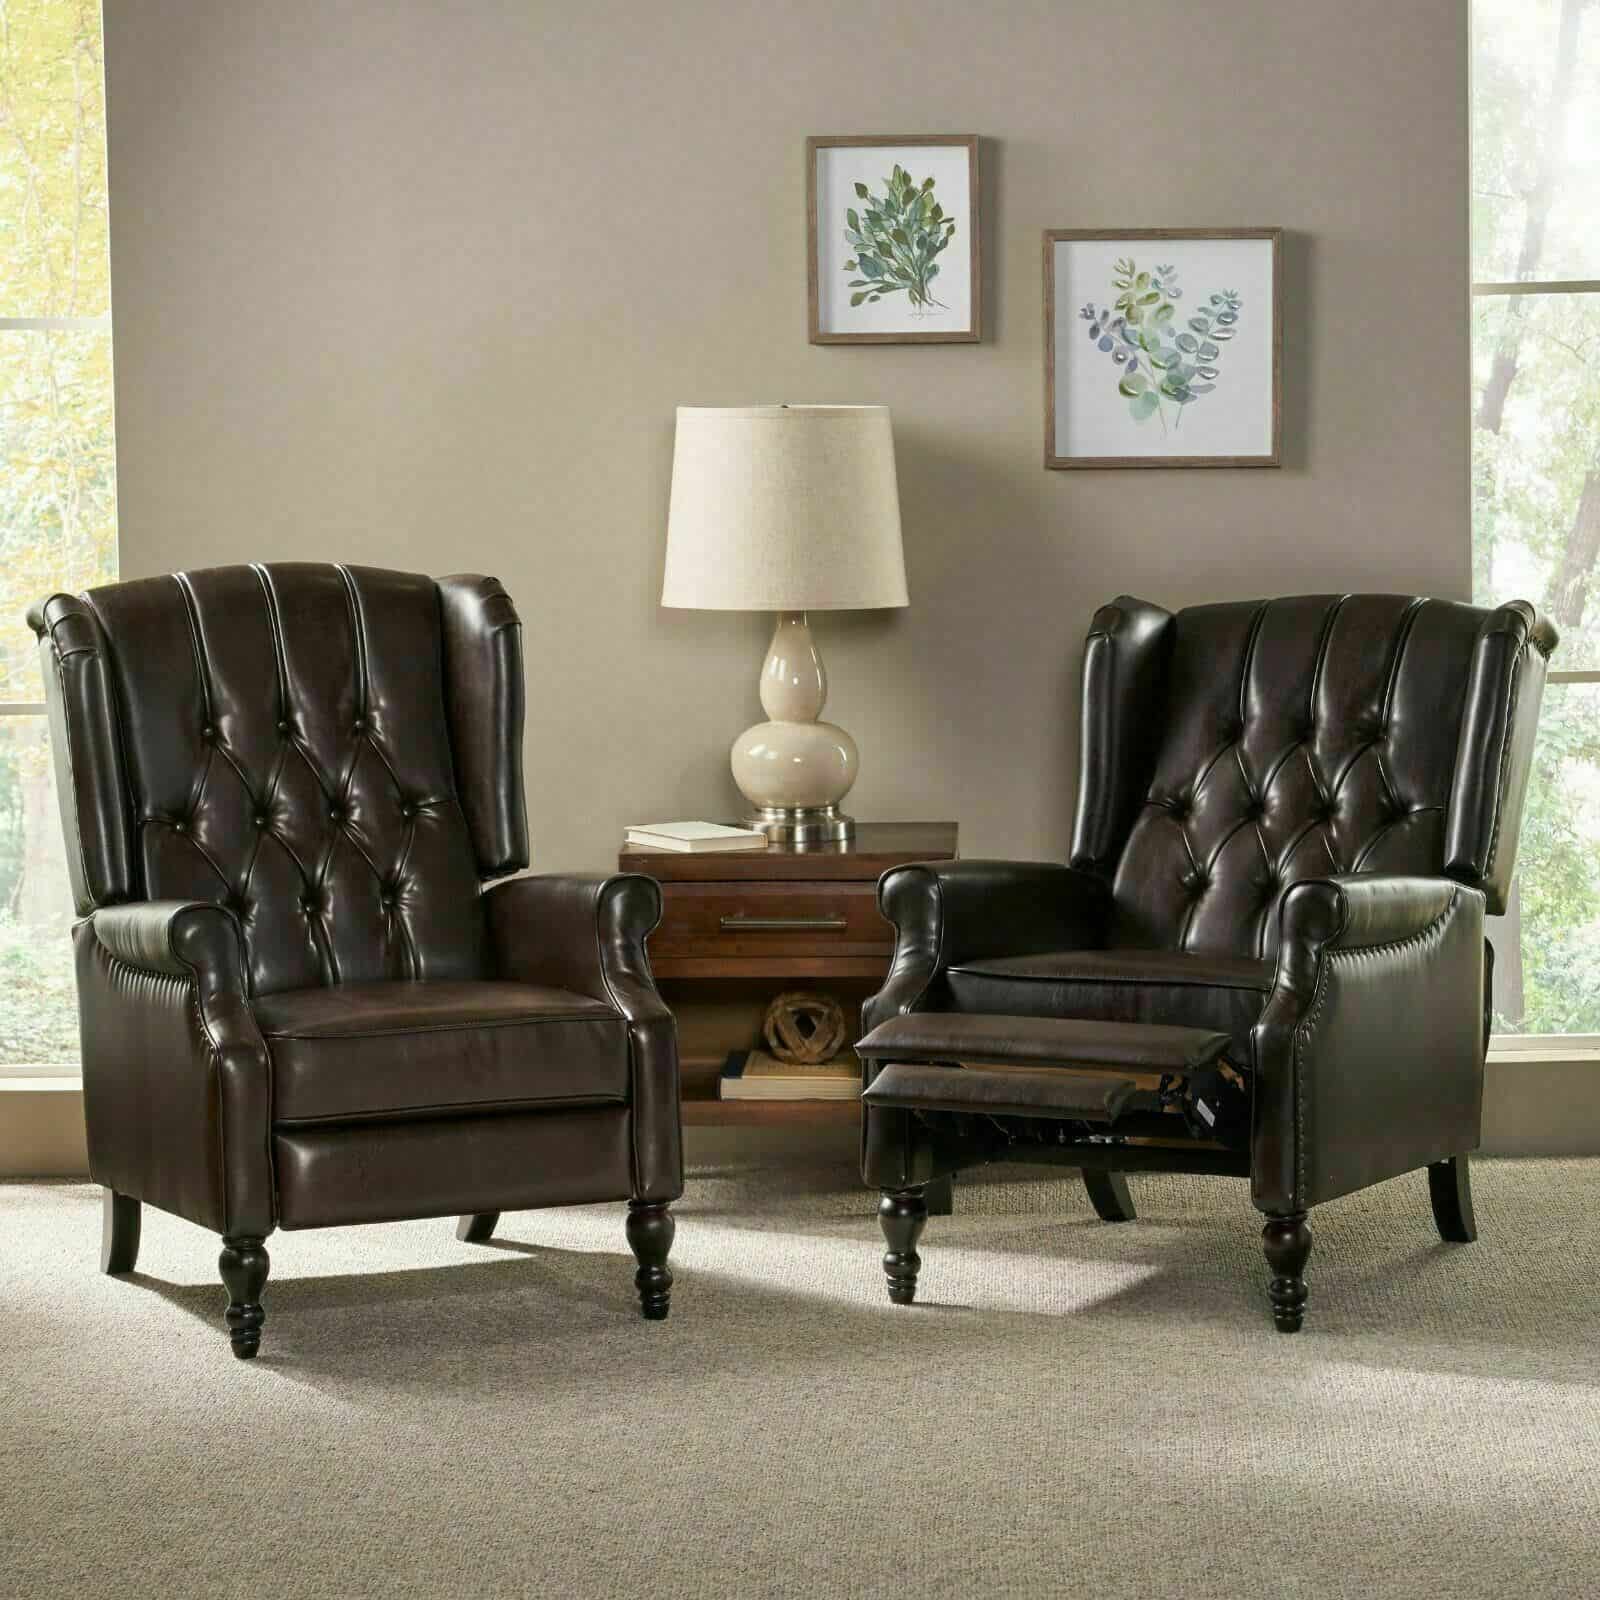 Two brown leather recliners in a living room.